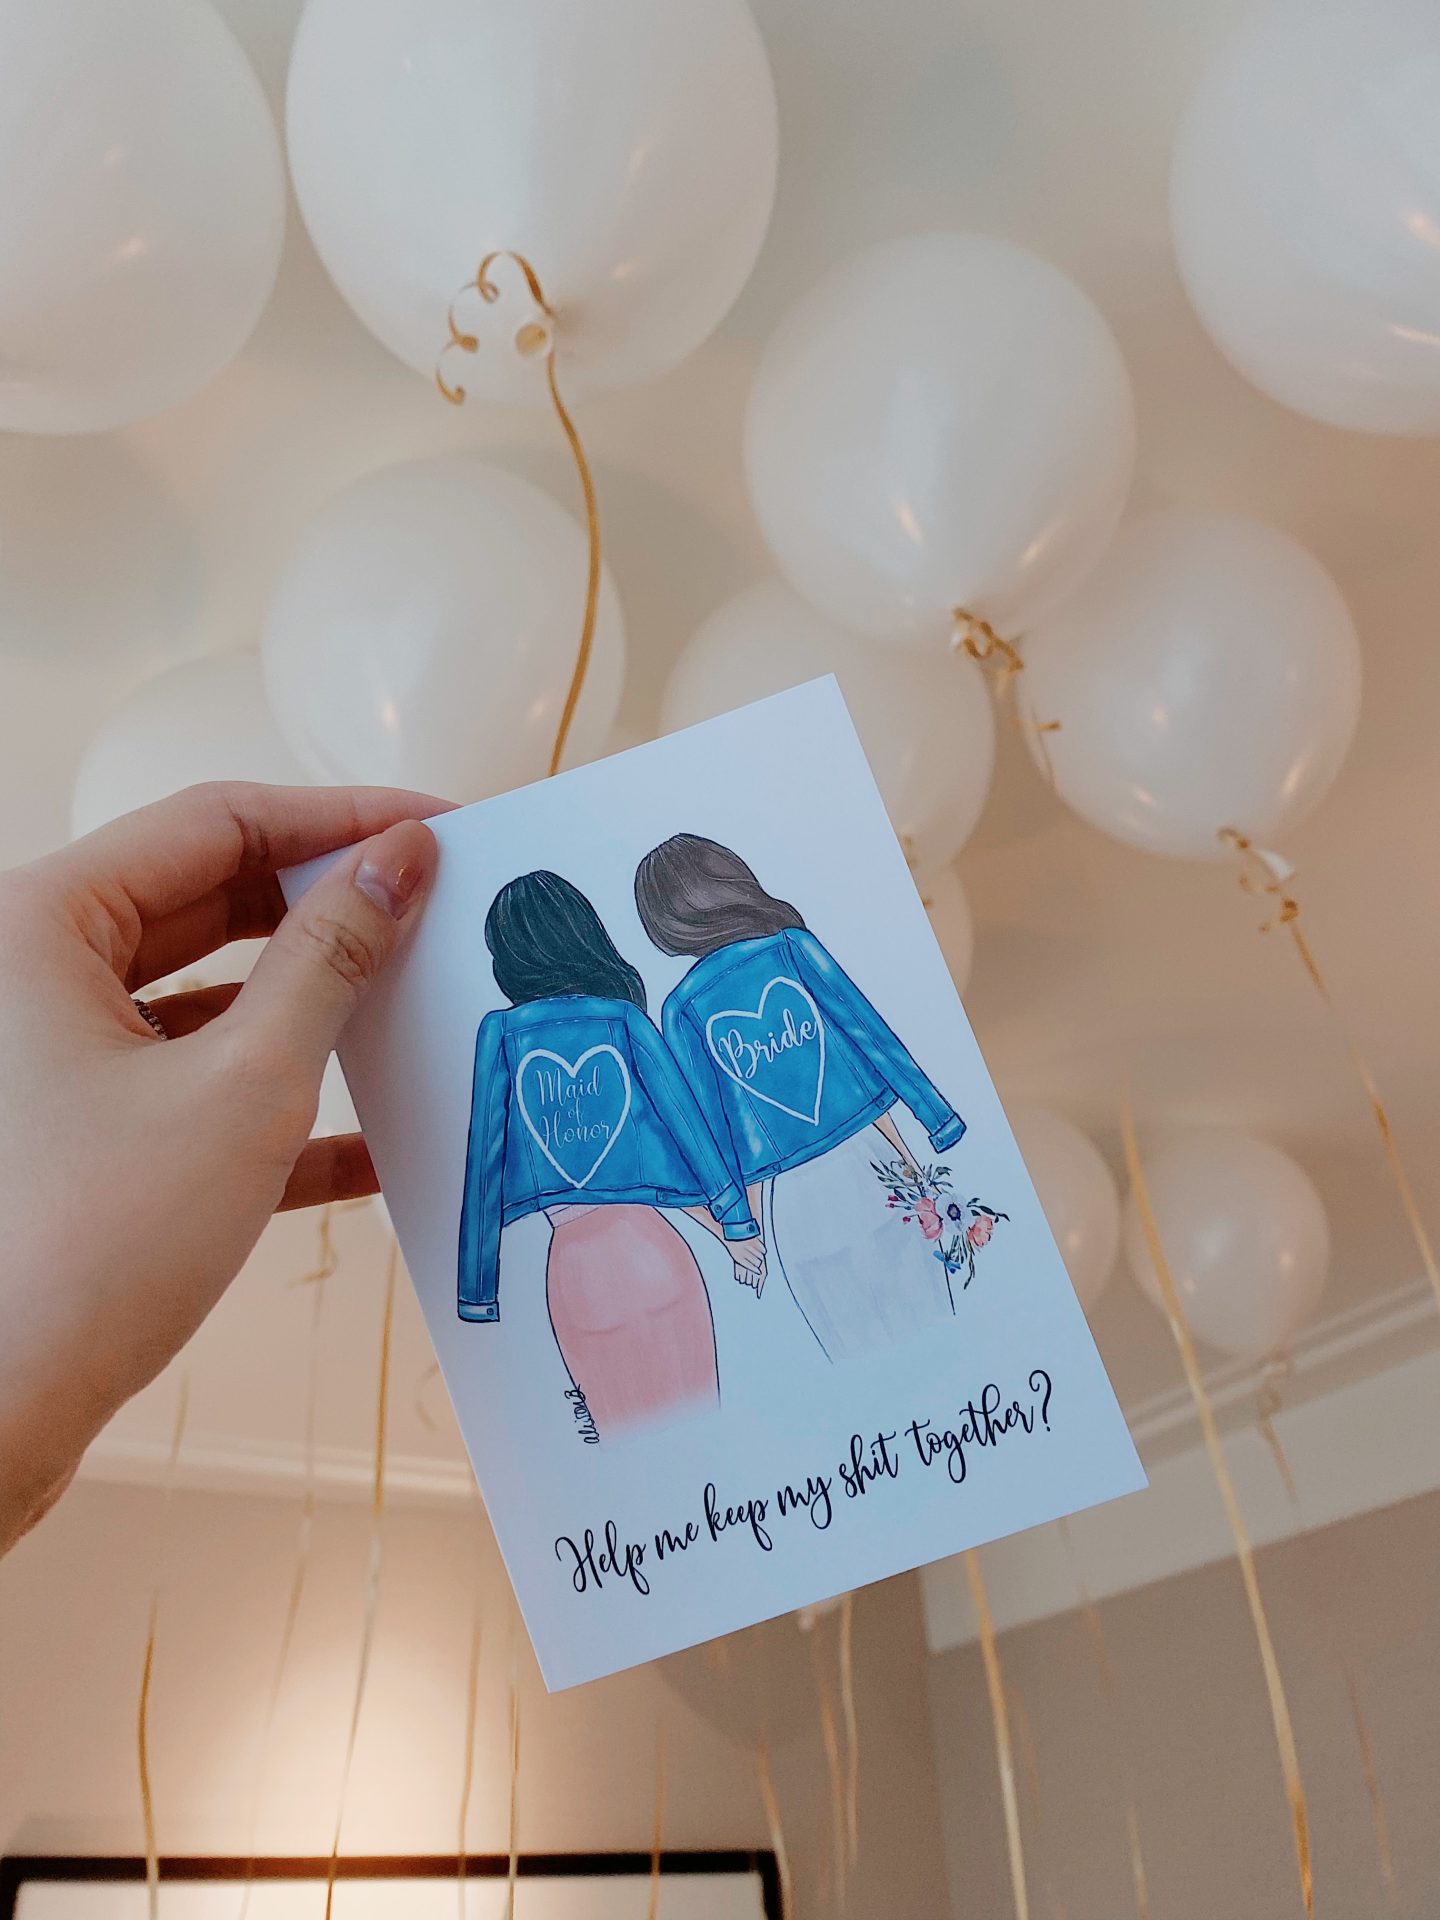 picture of my bridesmaid proposal card on a background of balloons